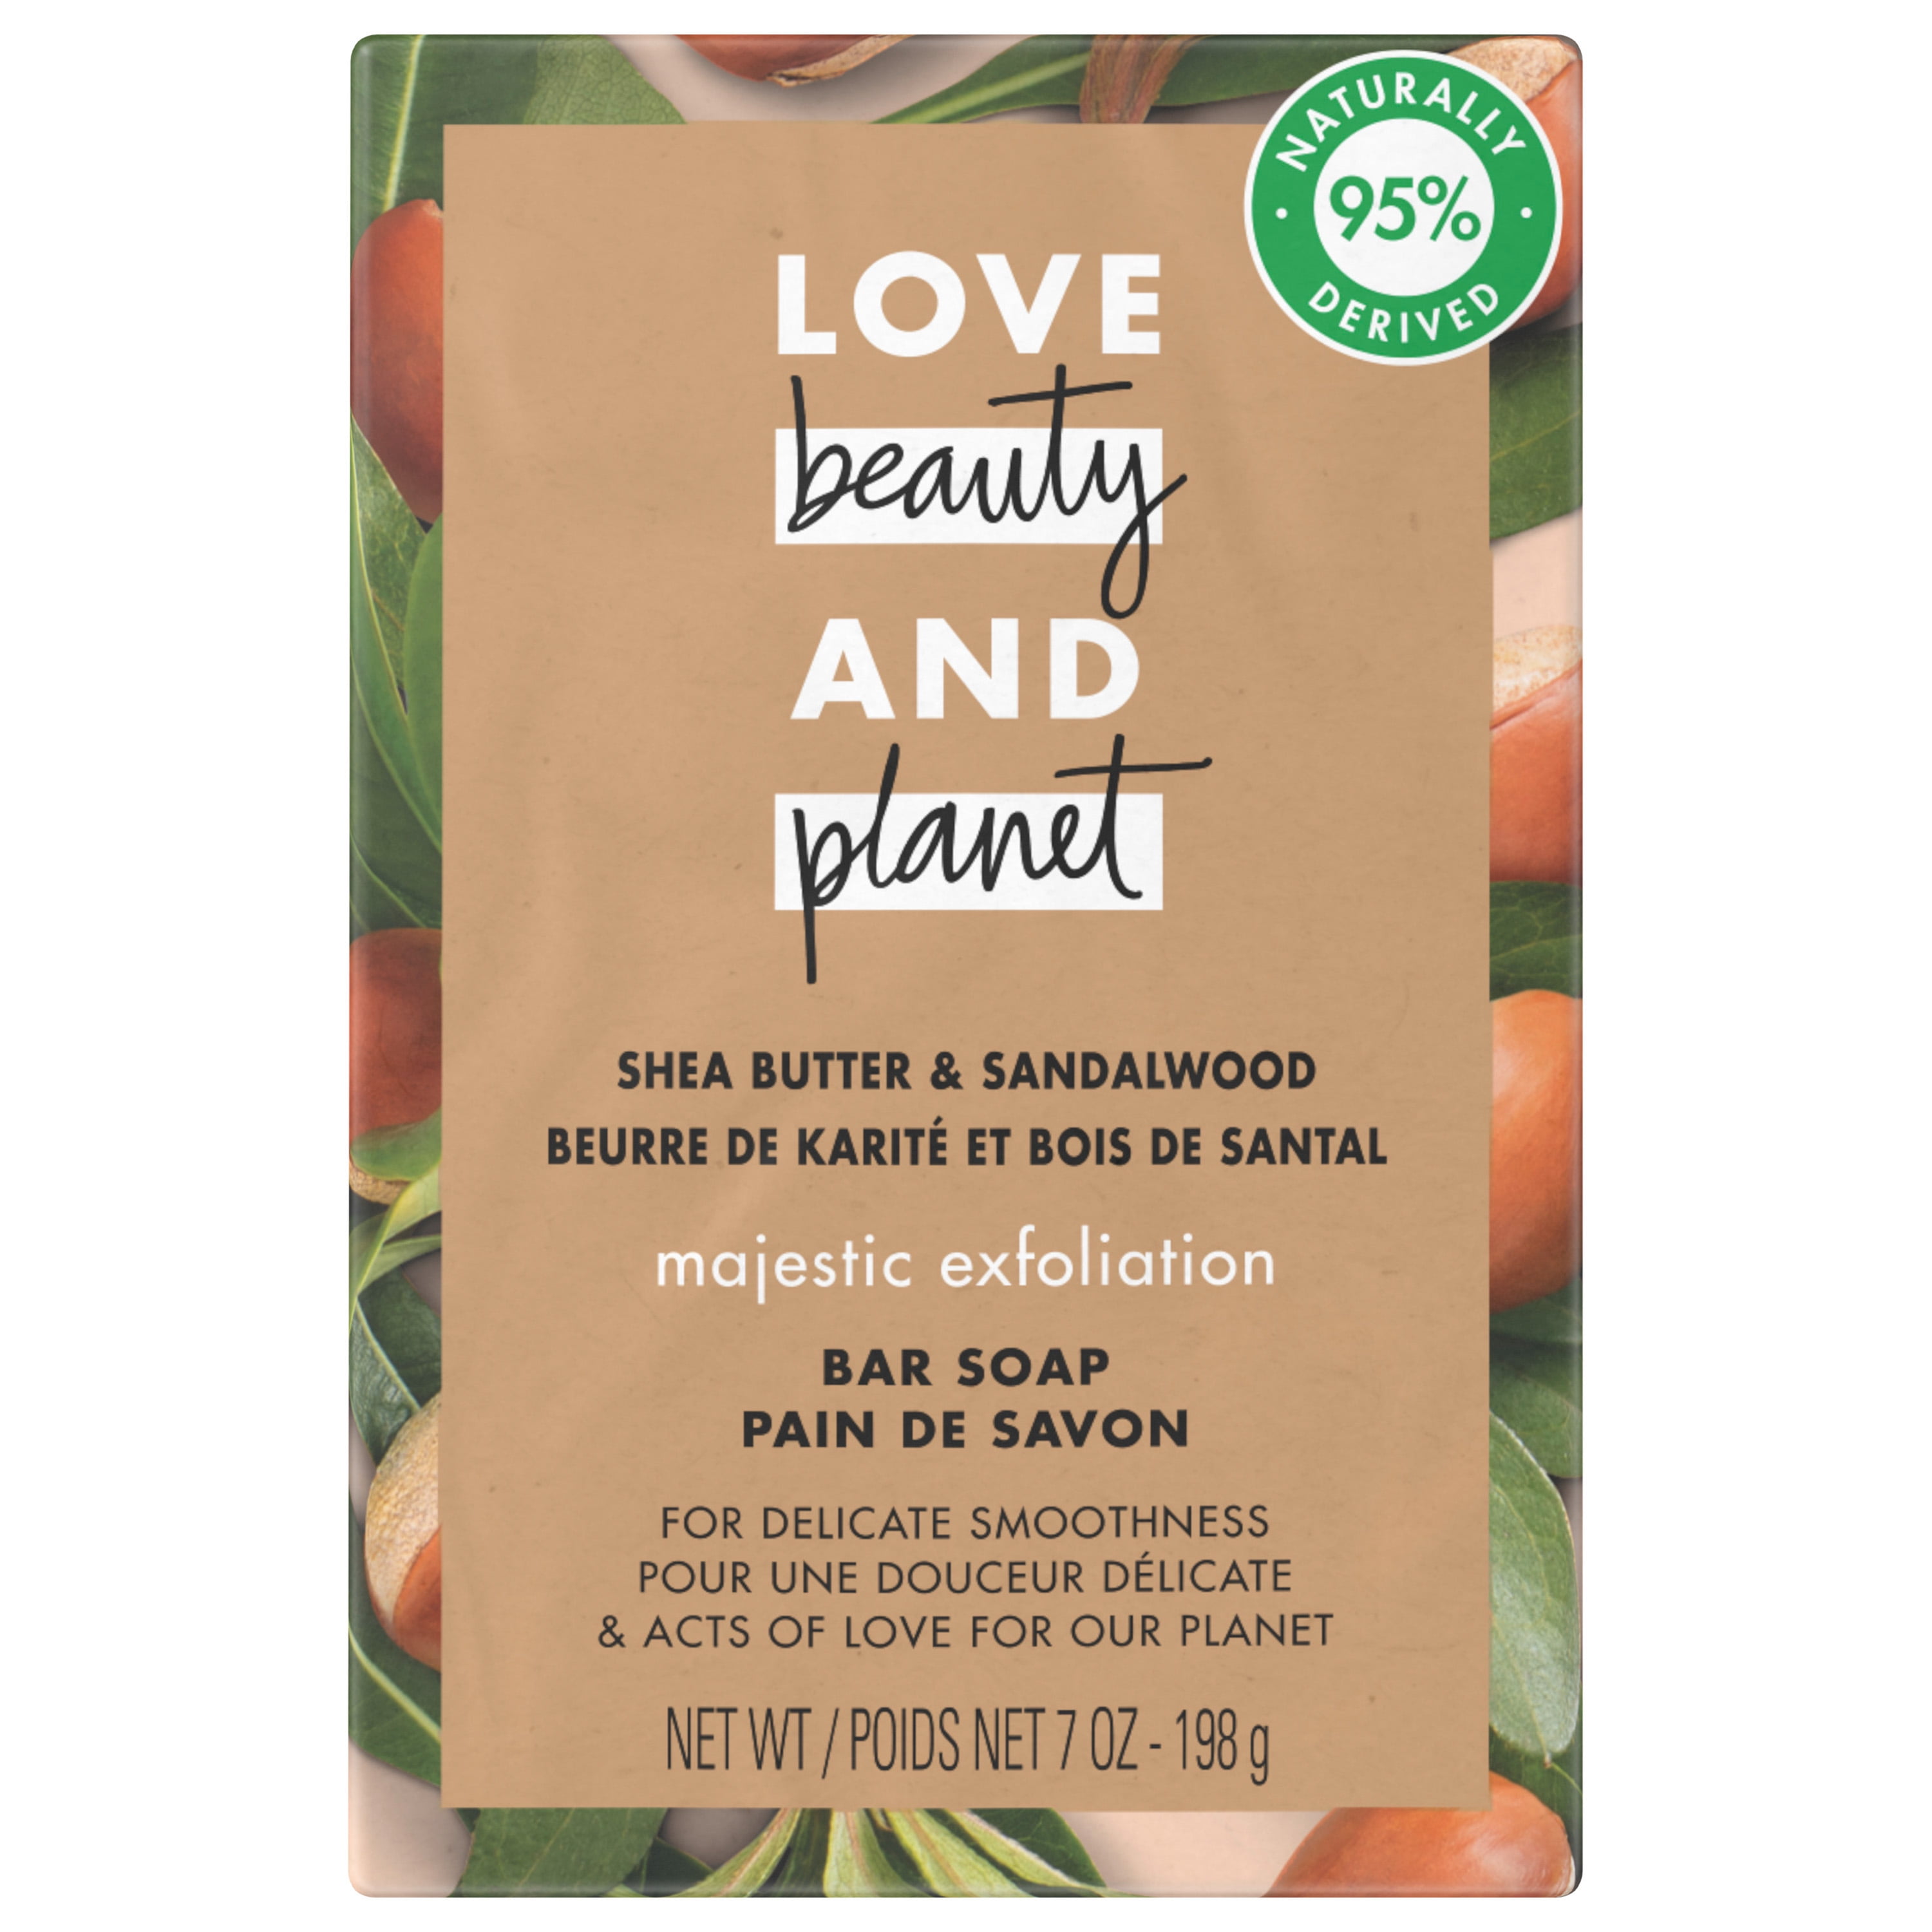 Juicy Peach Shea Butter Soap – Peaceful Embrace Candles, Soaps